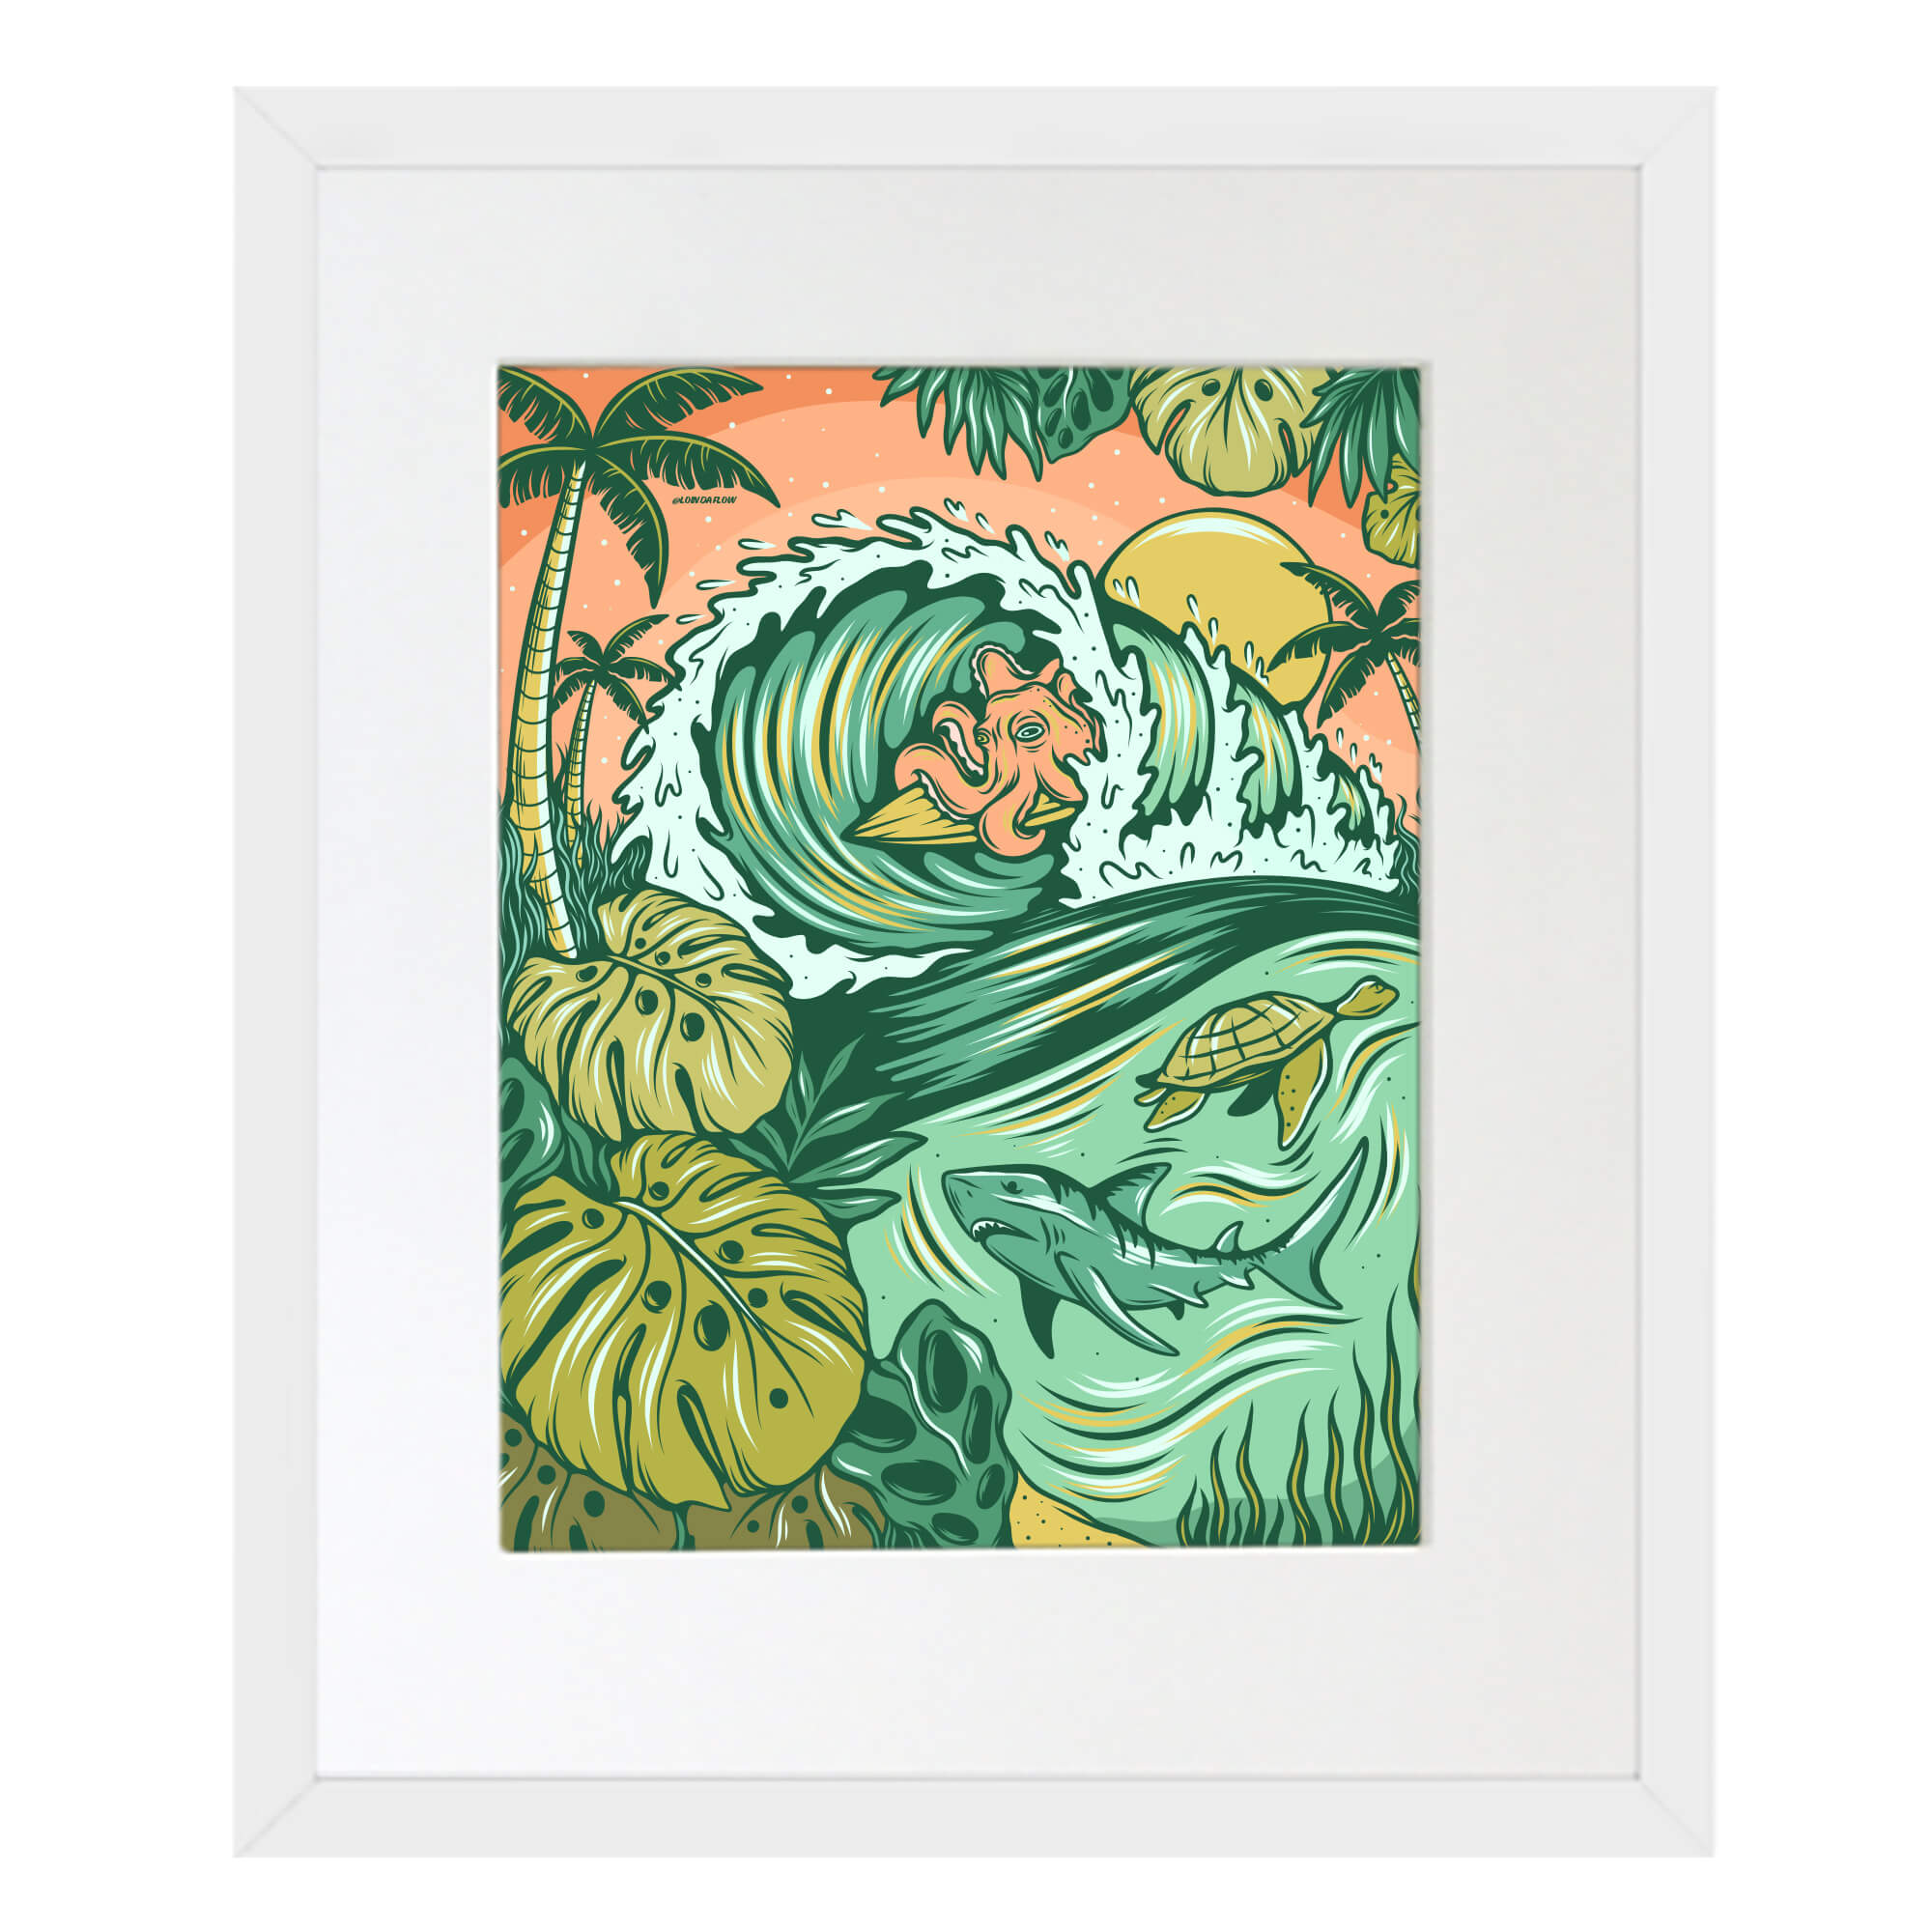 Matted art print of a shark and a turtle under water by Hawaii artist Laihha Organna